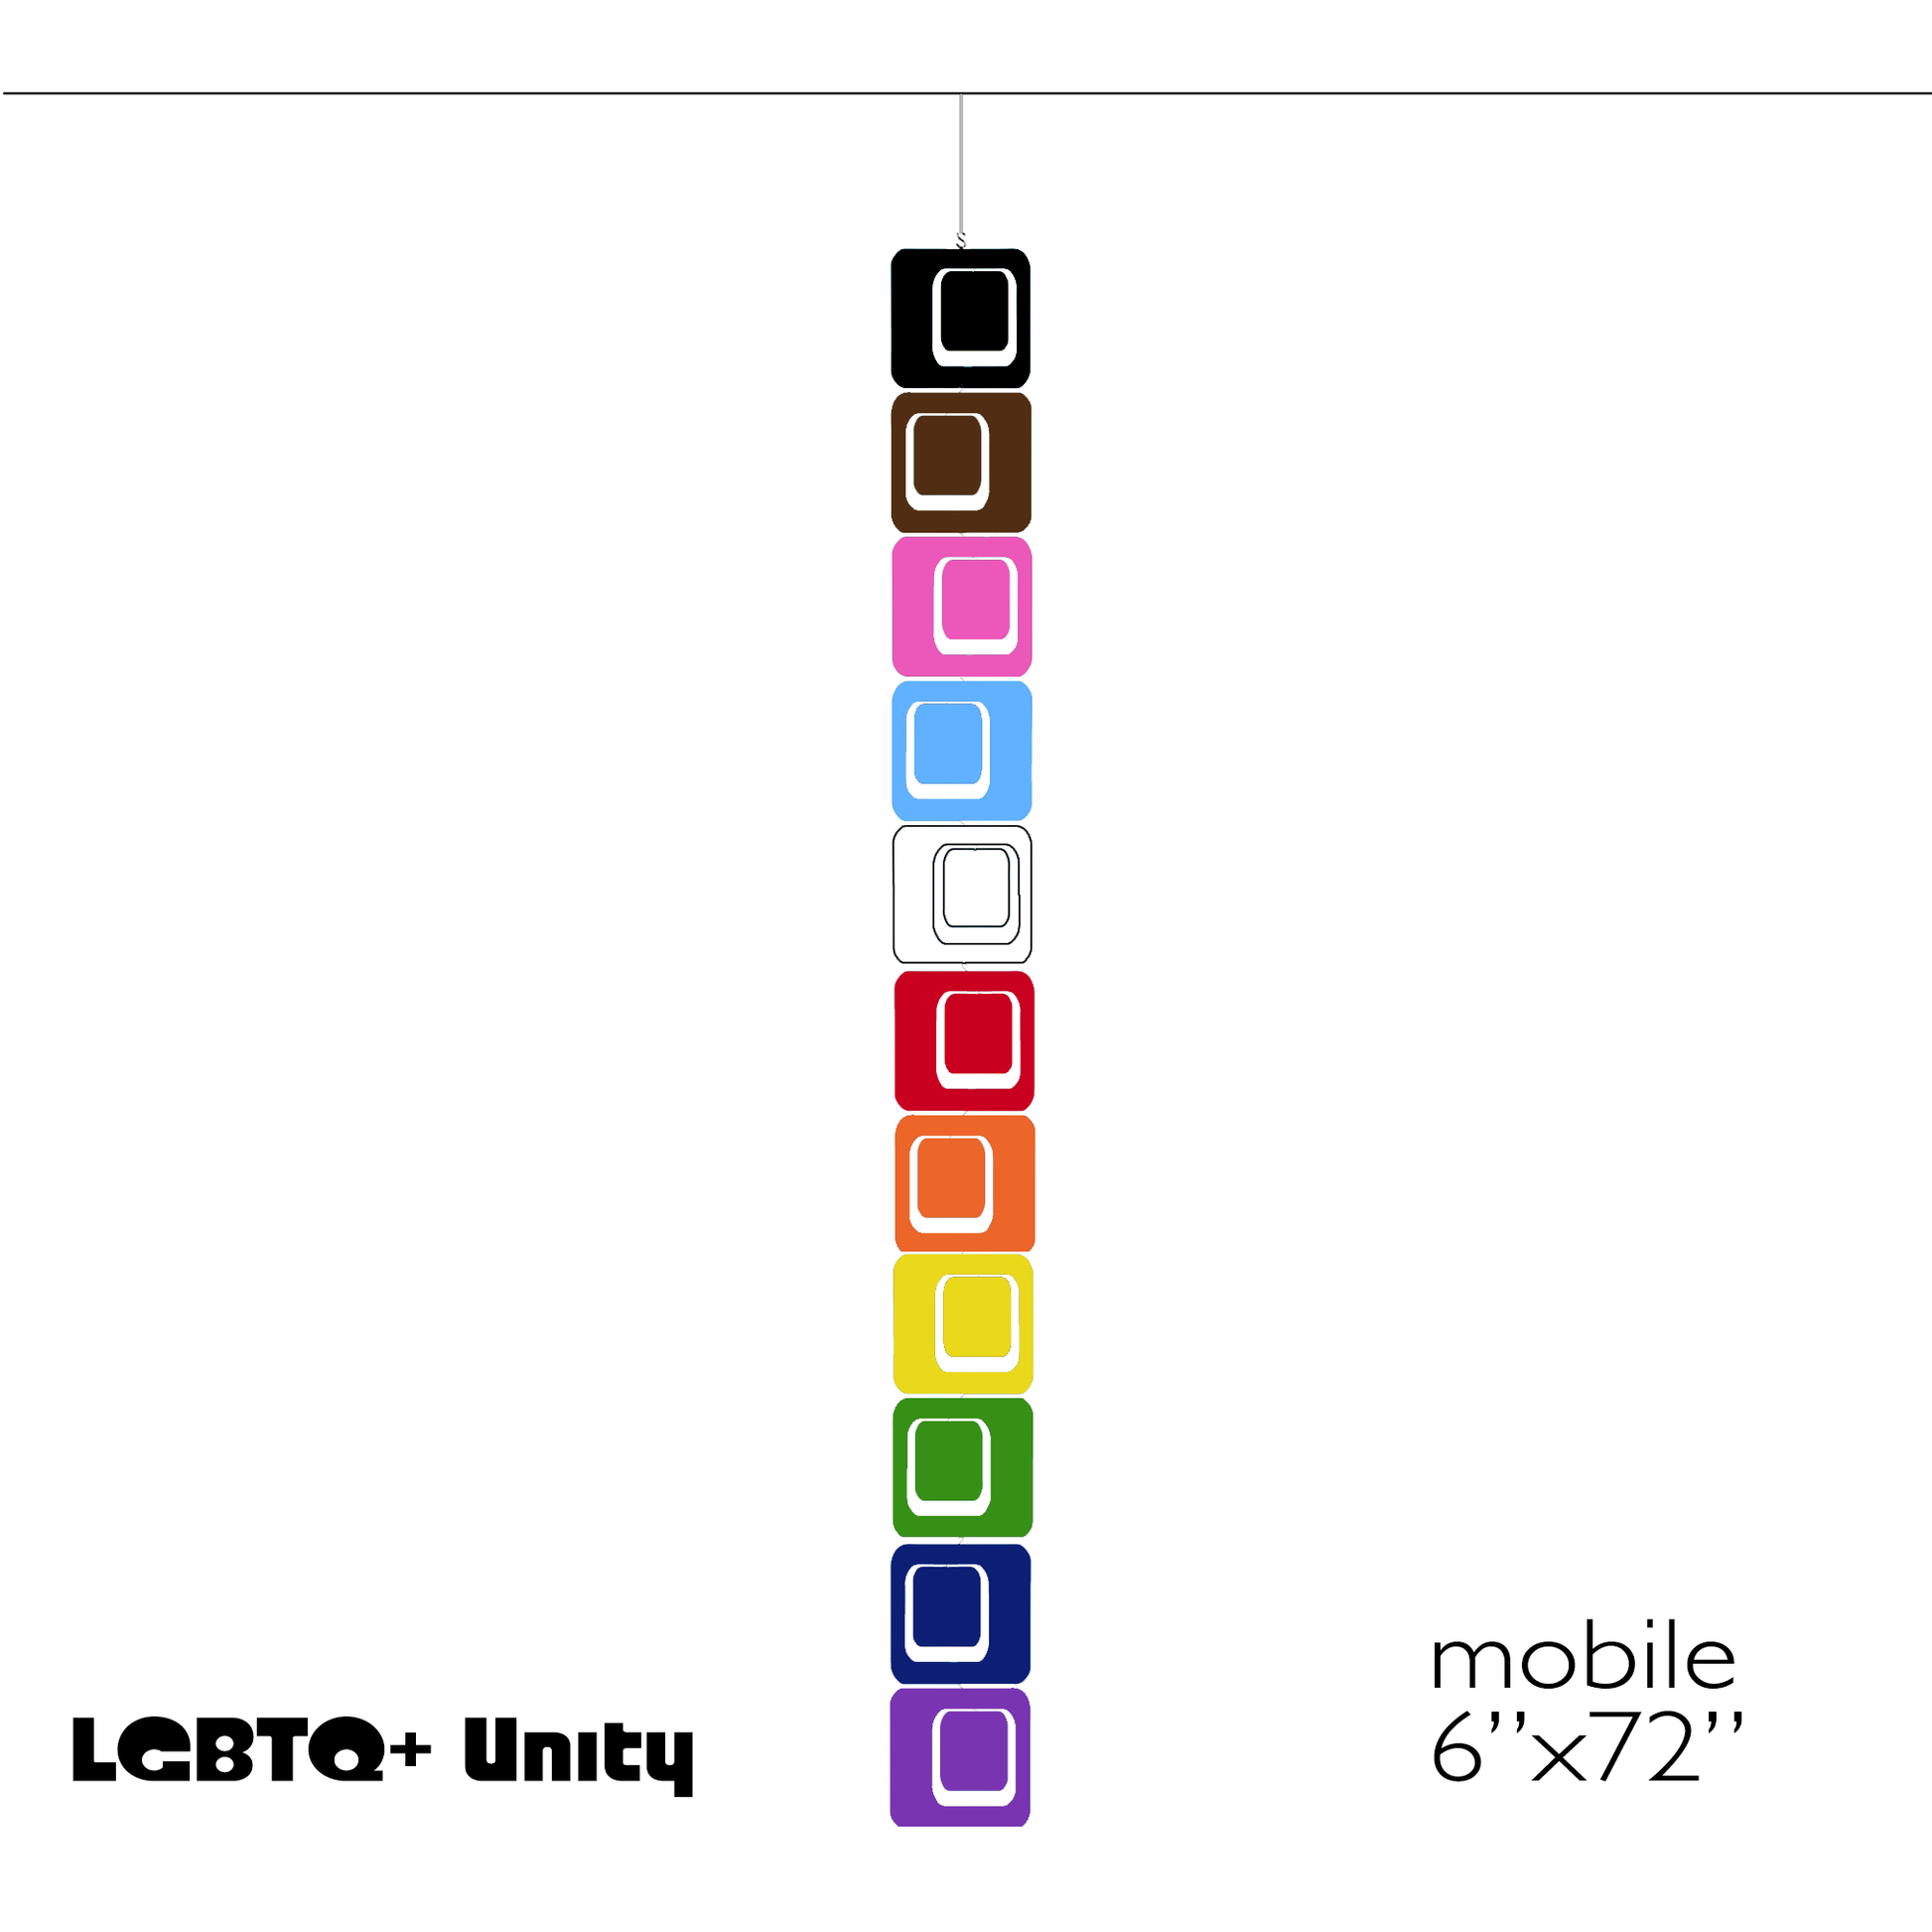 LGBTQ+ Unity Mobile Installation, Room Divider 6"x72" by AtomicMobiles.com - LOVE IS LOVE